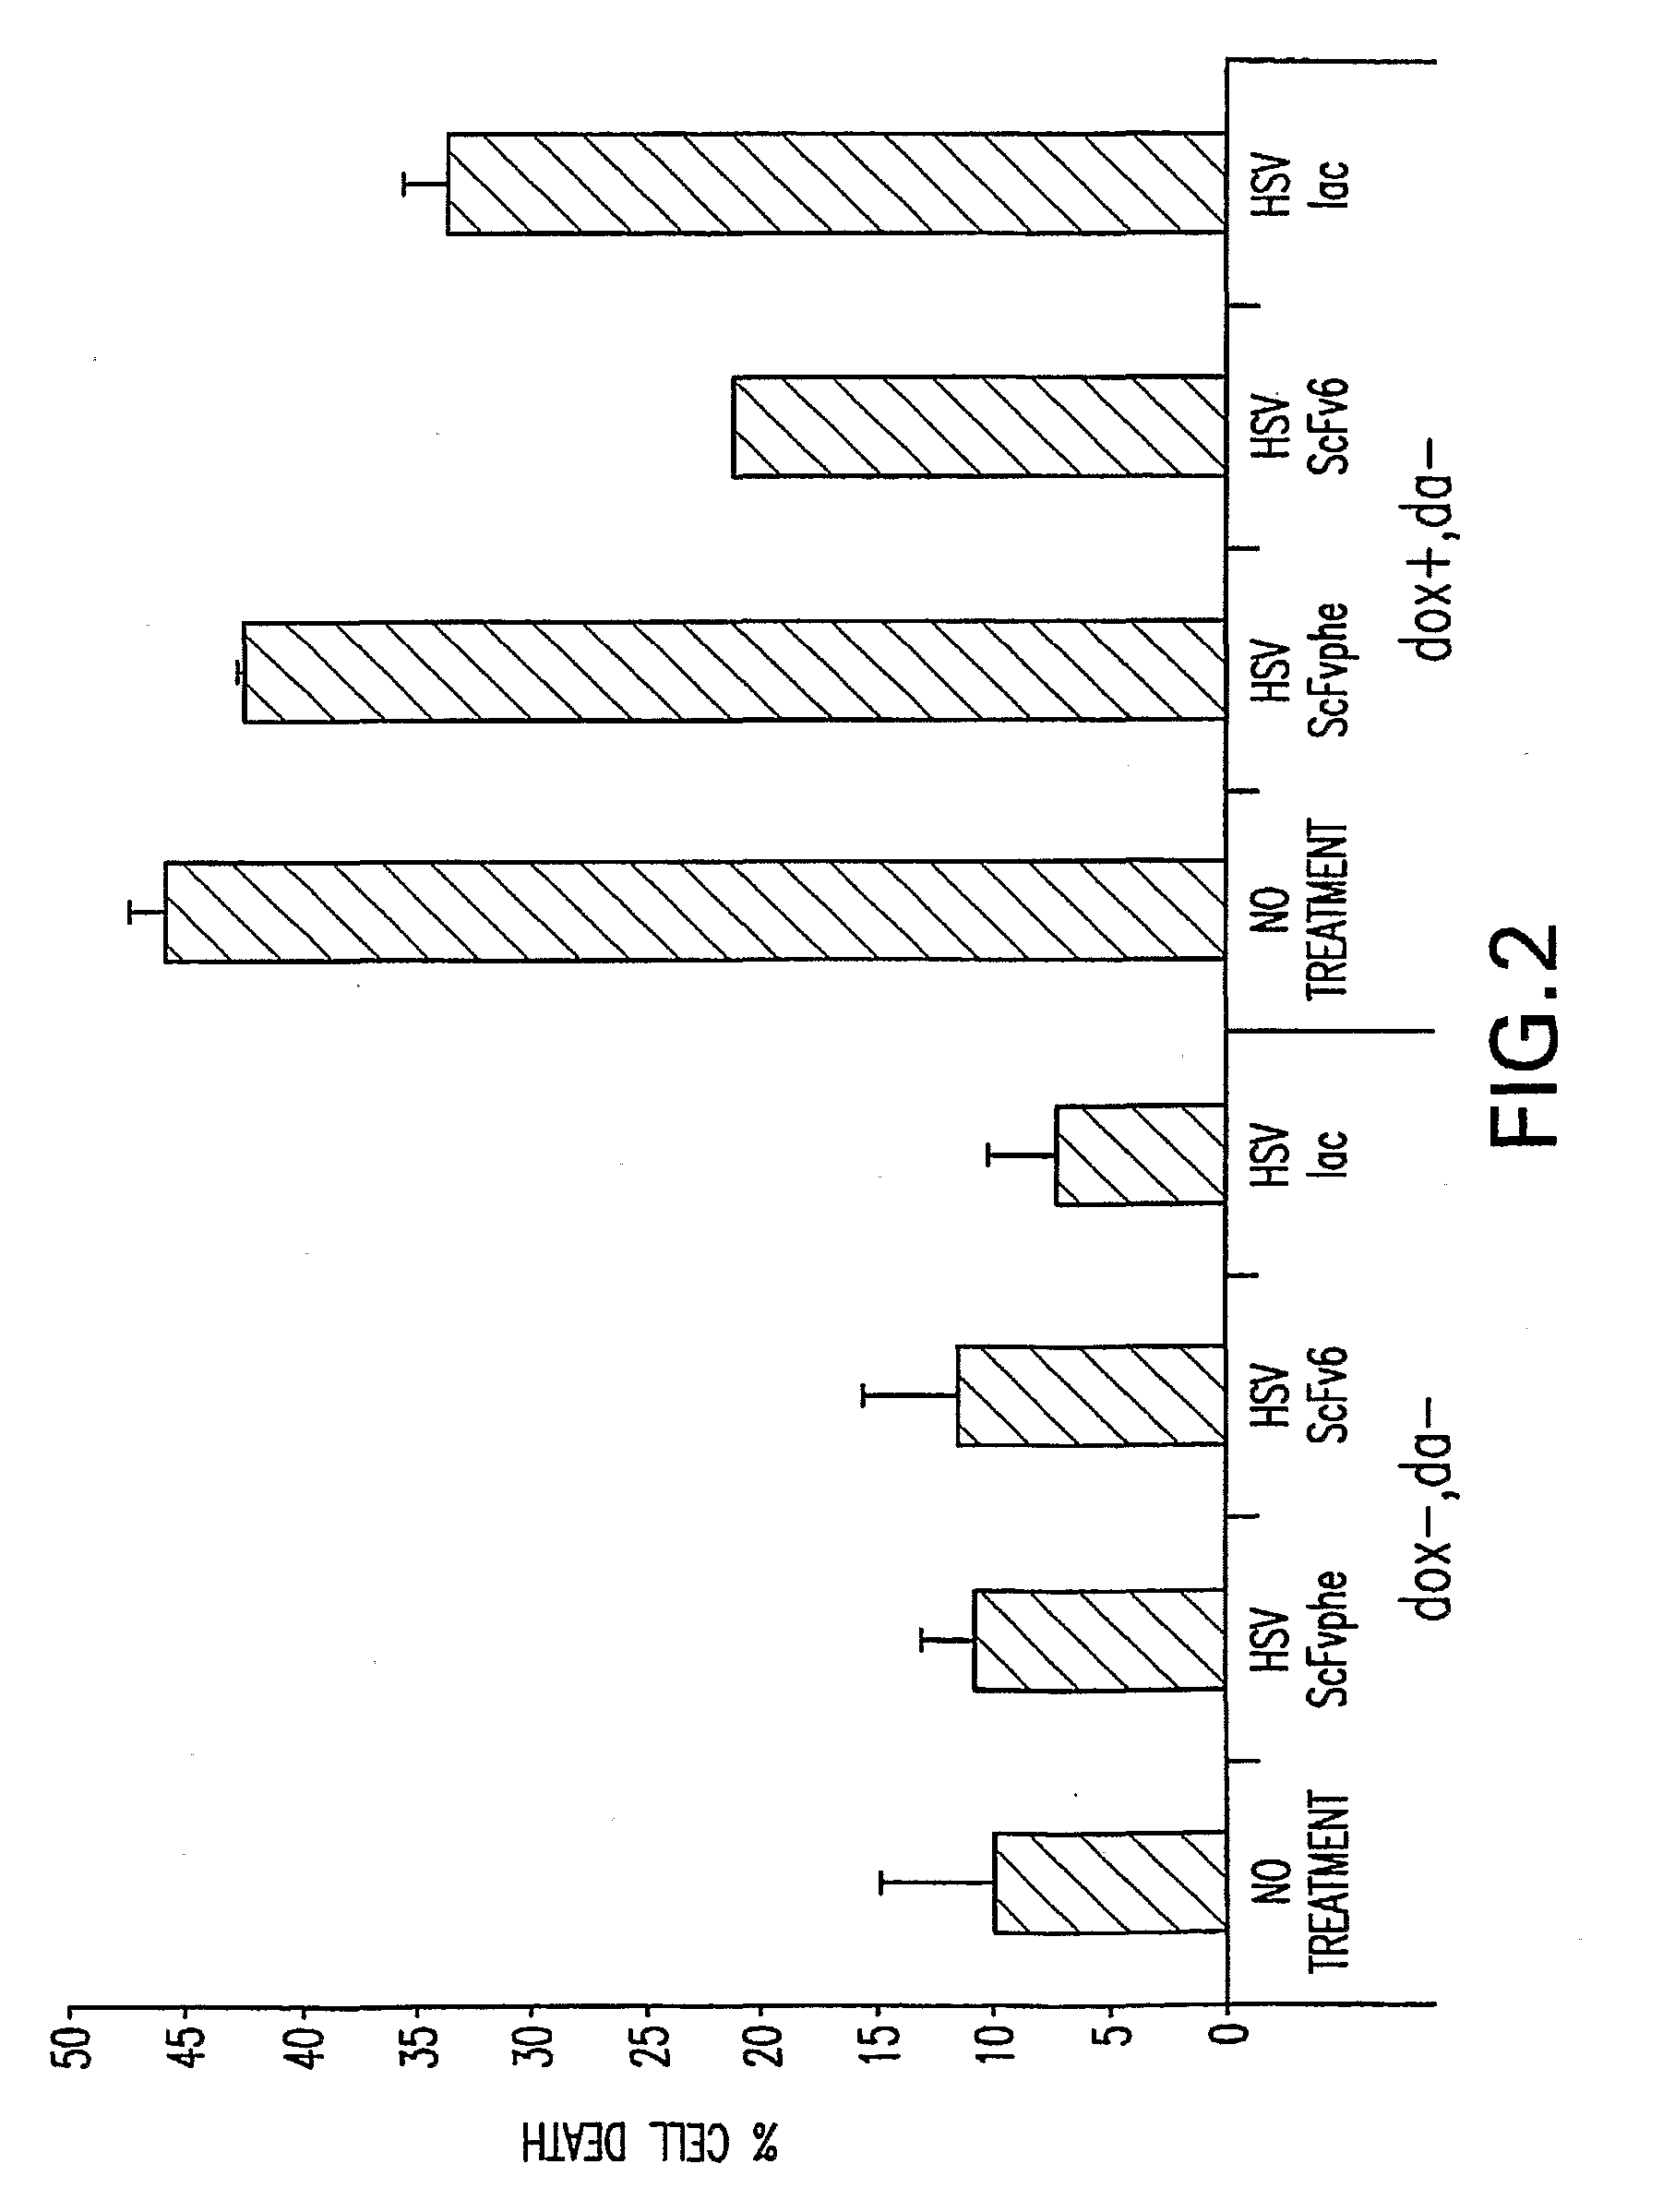 Alpha-Synuclein Antibodies and Methods Related Thereto